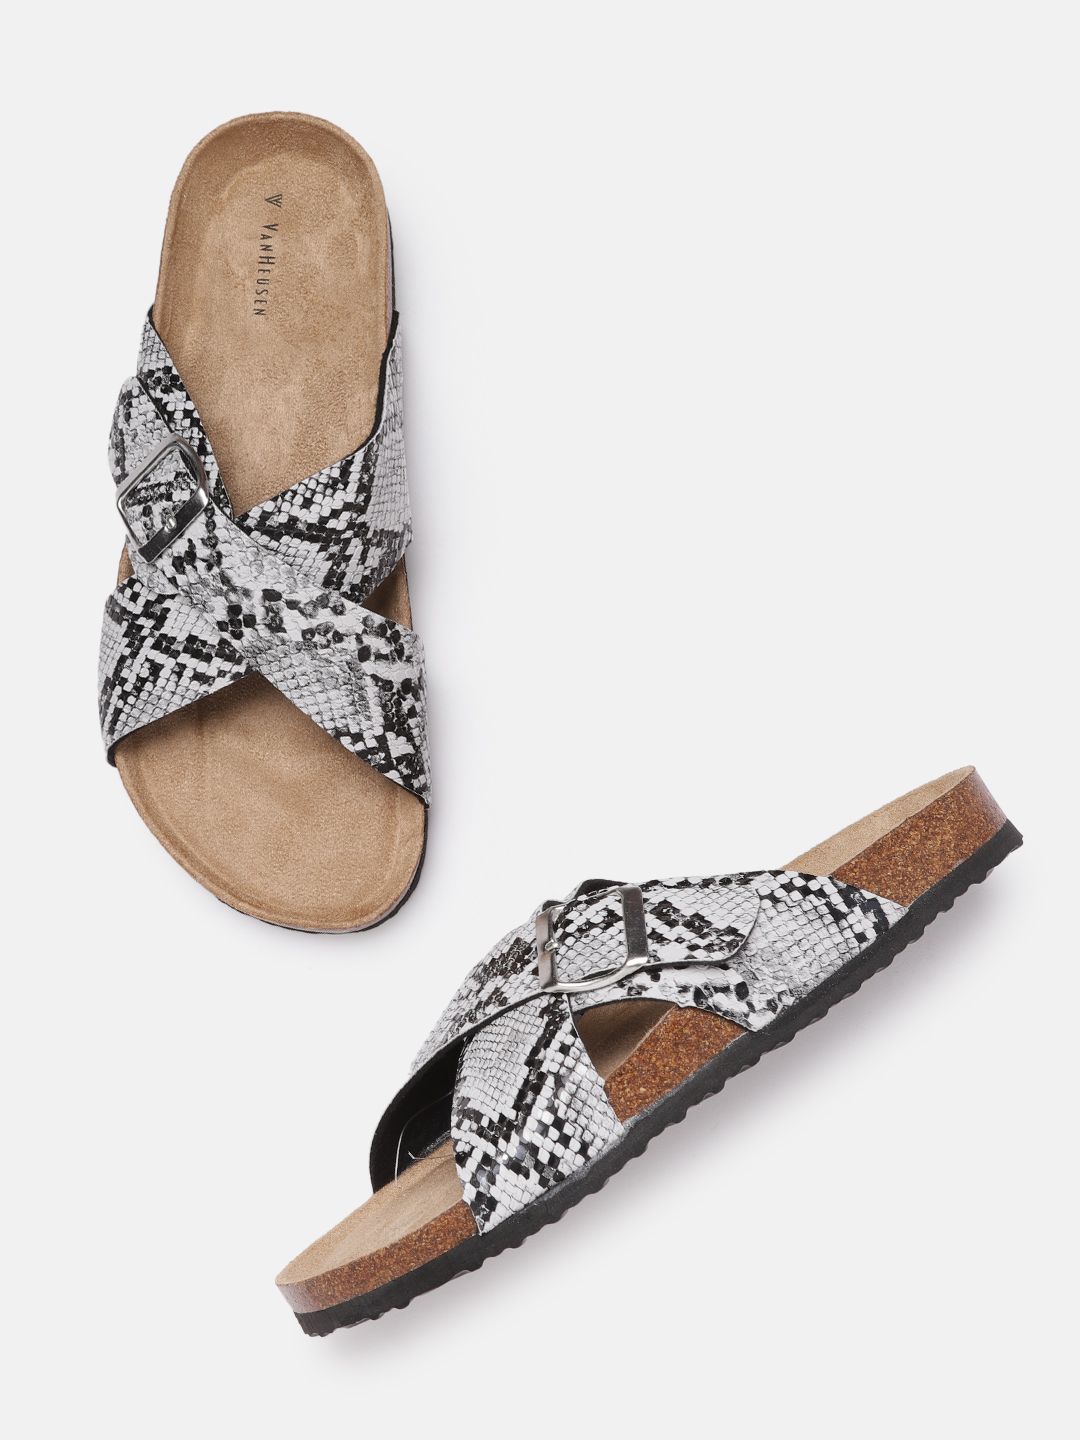 Van Heusen Woman Black & White Snake Skin Textured Open Toe Flats with Buckle Detail Price in India